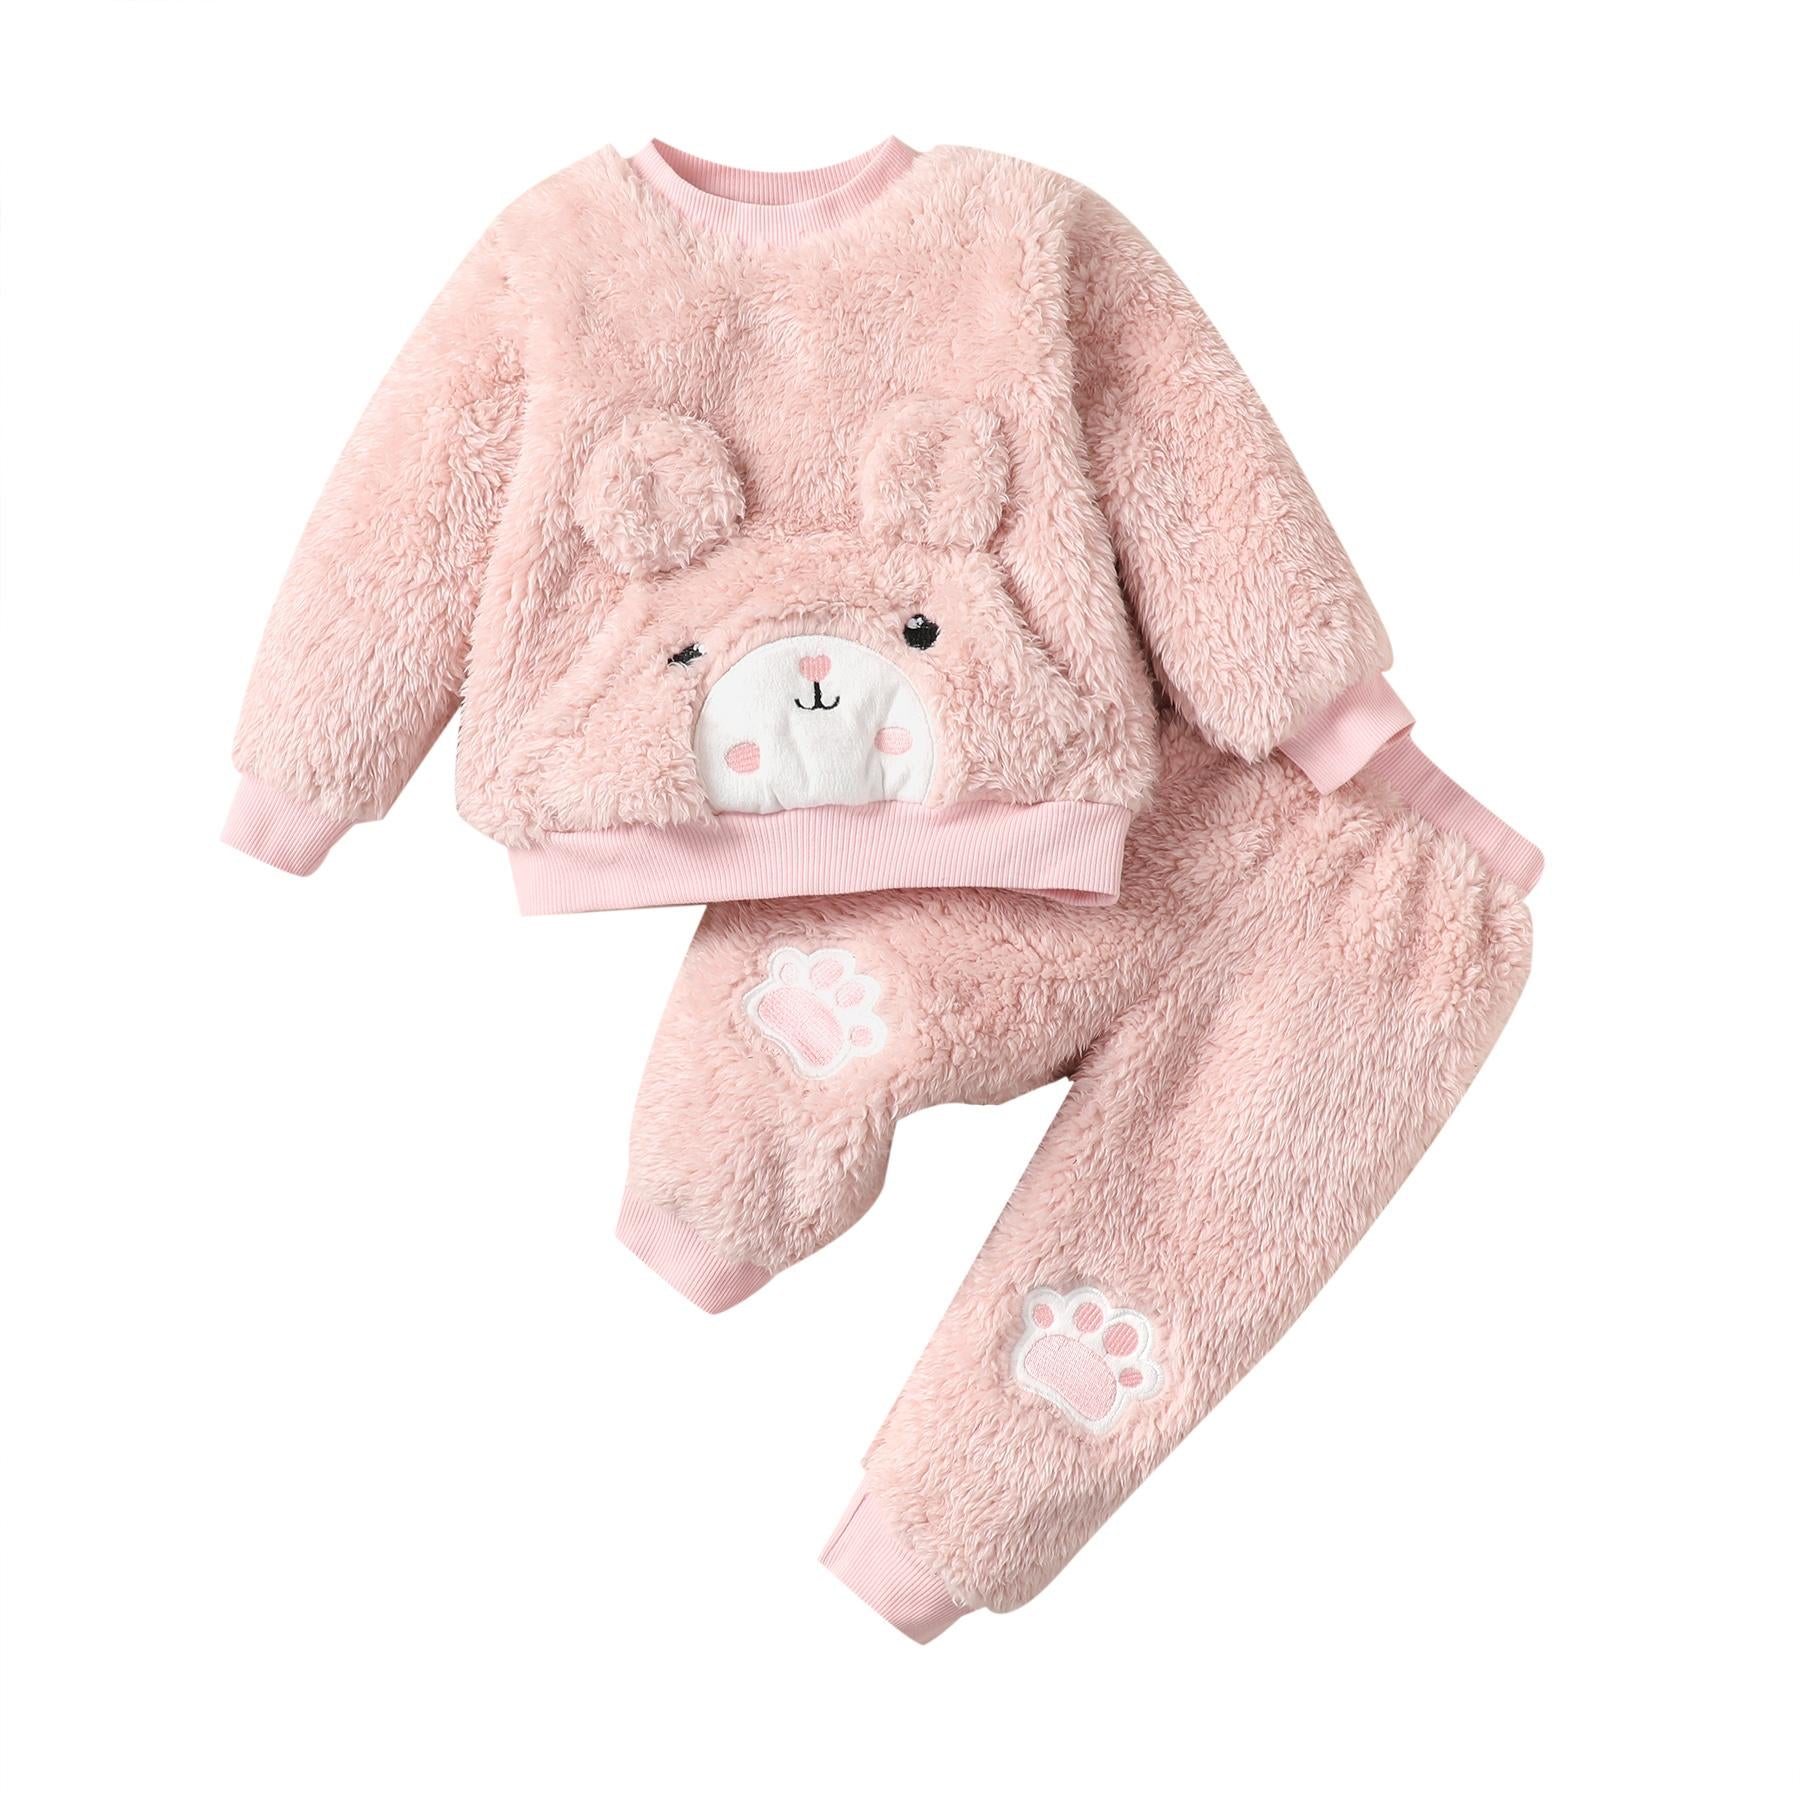 6M-3Y  Kids Fashion Ready Stock Girls Clothes Outfits Rabbit Fluffy Tops Elastic Pants 2Pcs Outfits Pink Catpapa  WS112209601